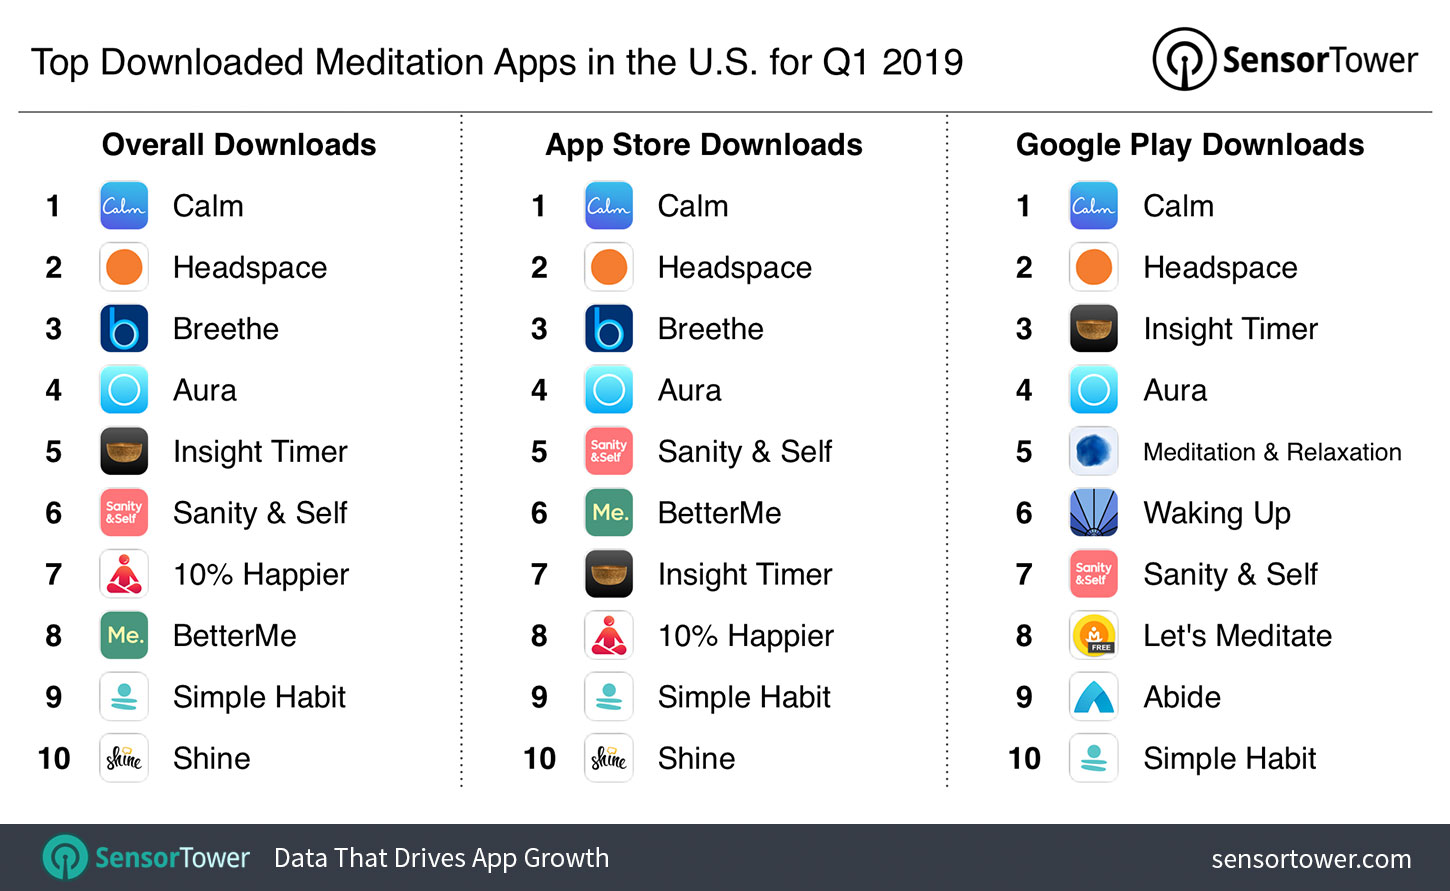 Top Meditation Apps in the U.S. for Q1 2019 by Downloads